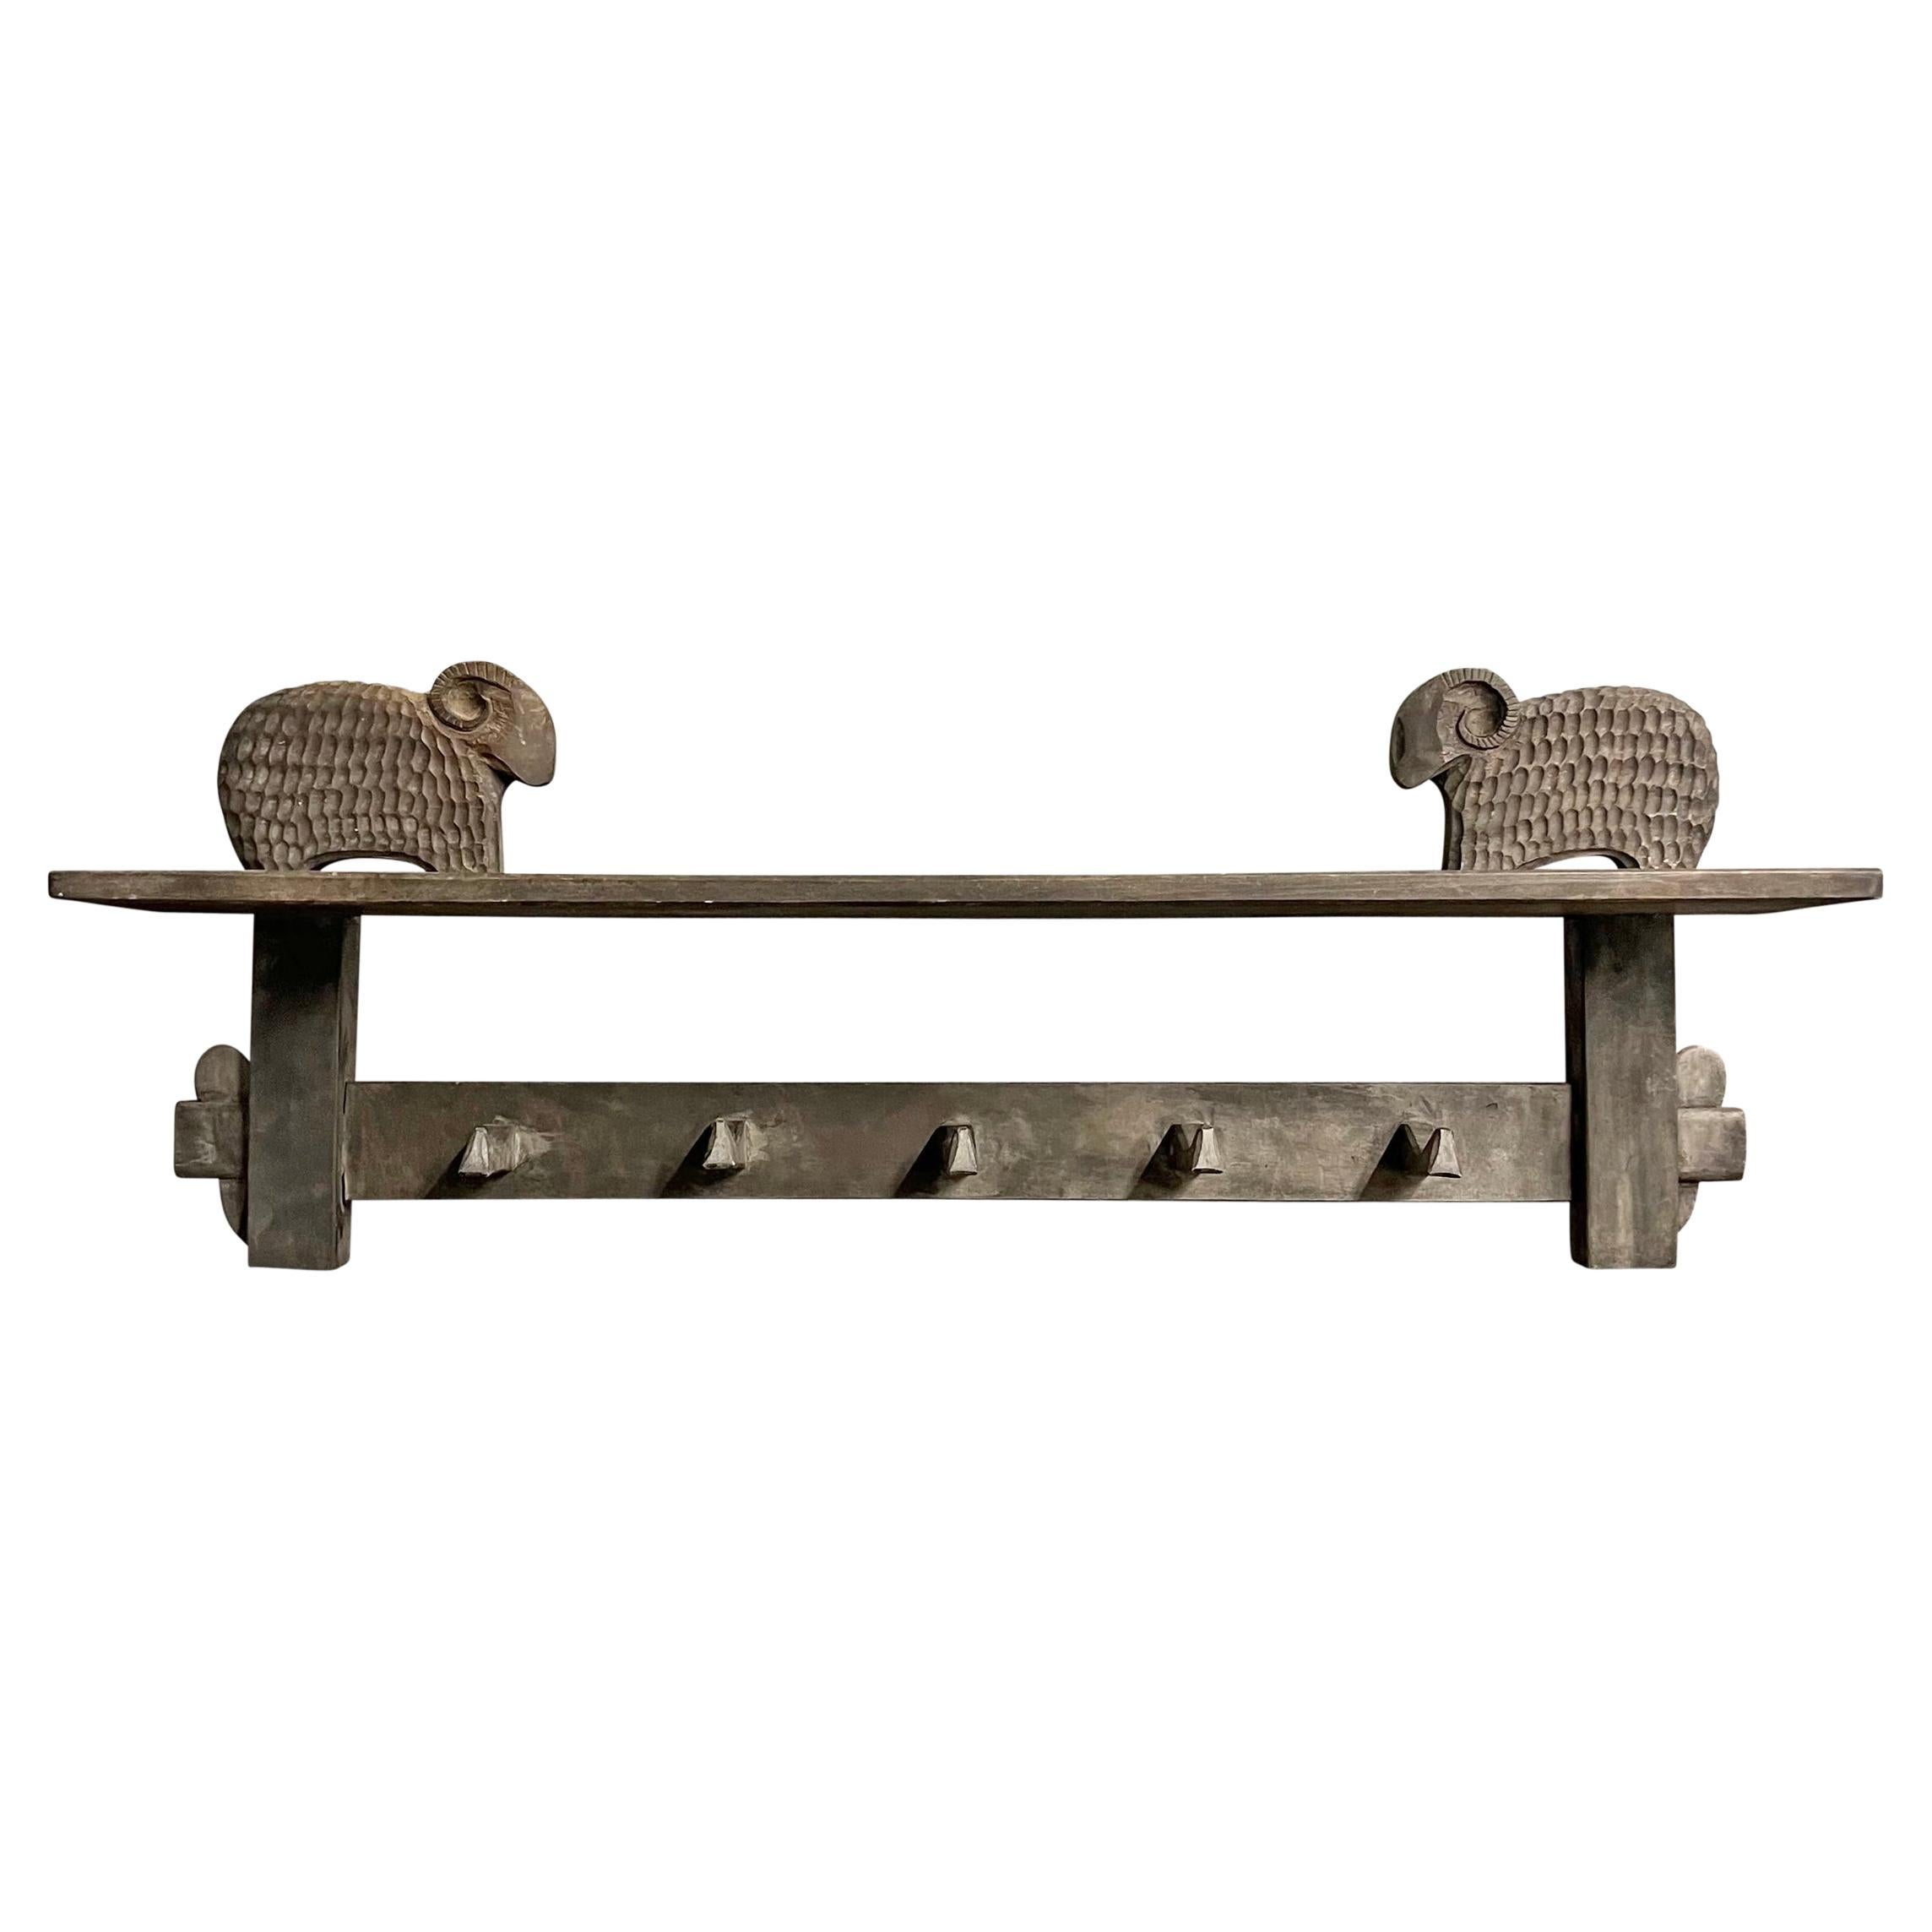 1950s French Modernist Wall Shelf and Coat Rack with Rams For Sale